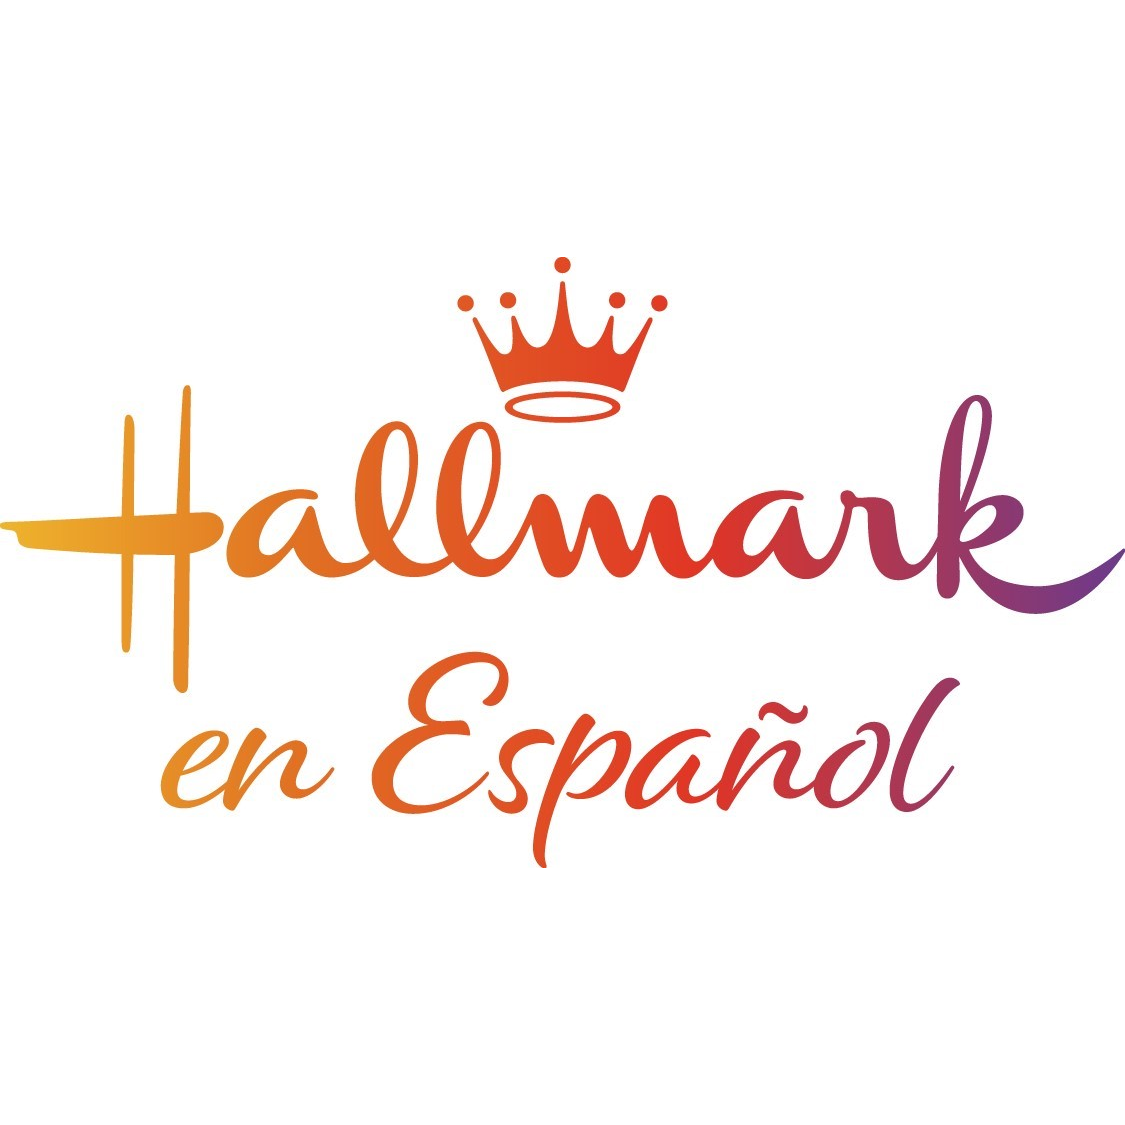 Cover image for  article: Hallmark Media Expands Distribution of Signature Programming to   Spanish-Speaking Audiences with Hallmark en Español